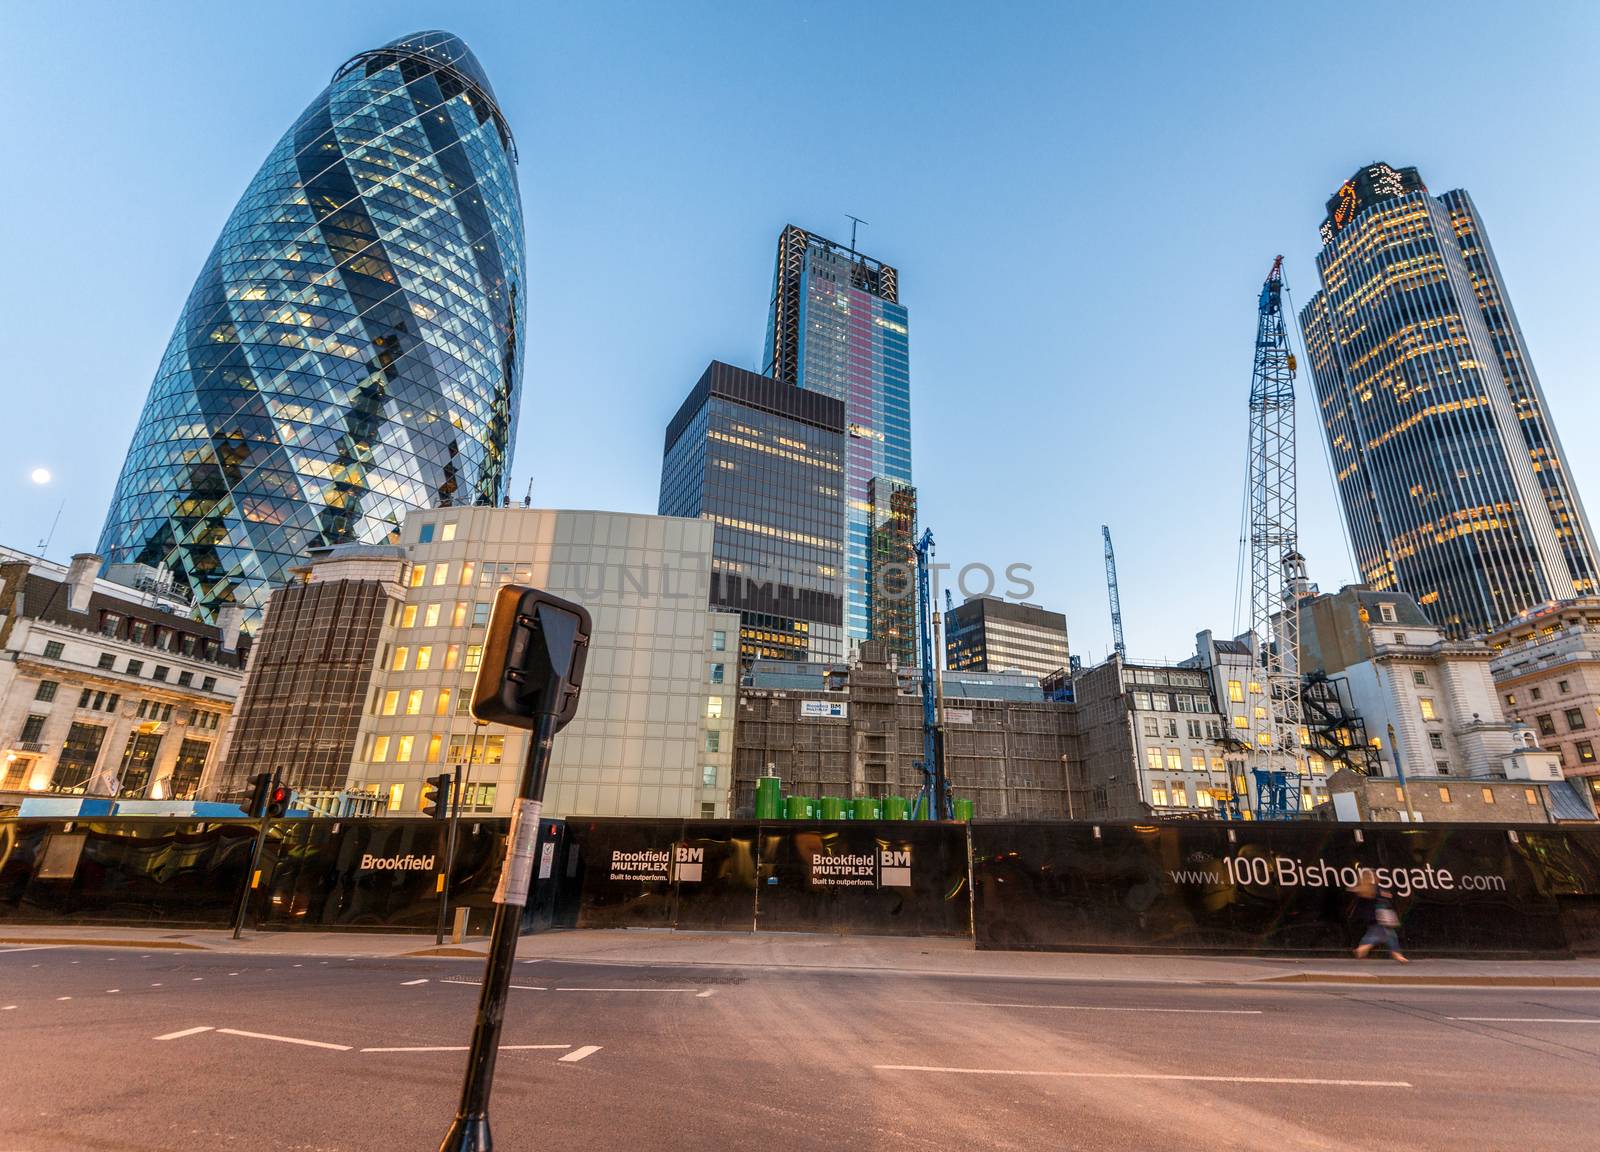 LONDON - JUNE 13, 2015: The Gherkin at sunset. The building is a commercial skyscraper in London's primary financial district, the City of London.